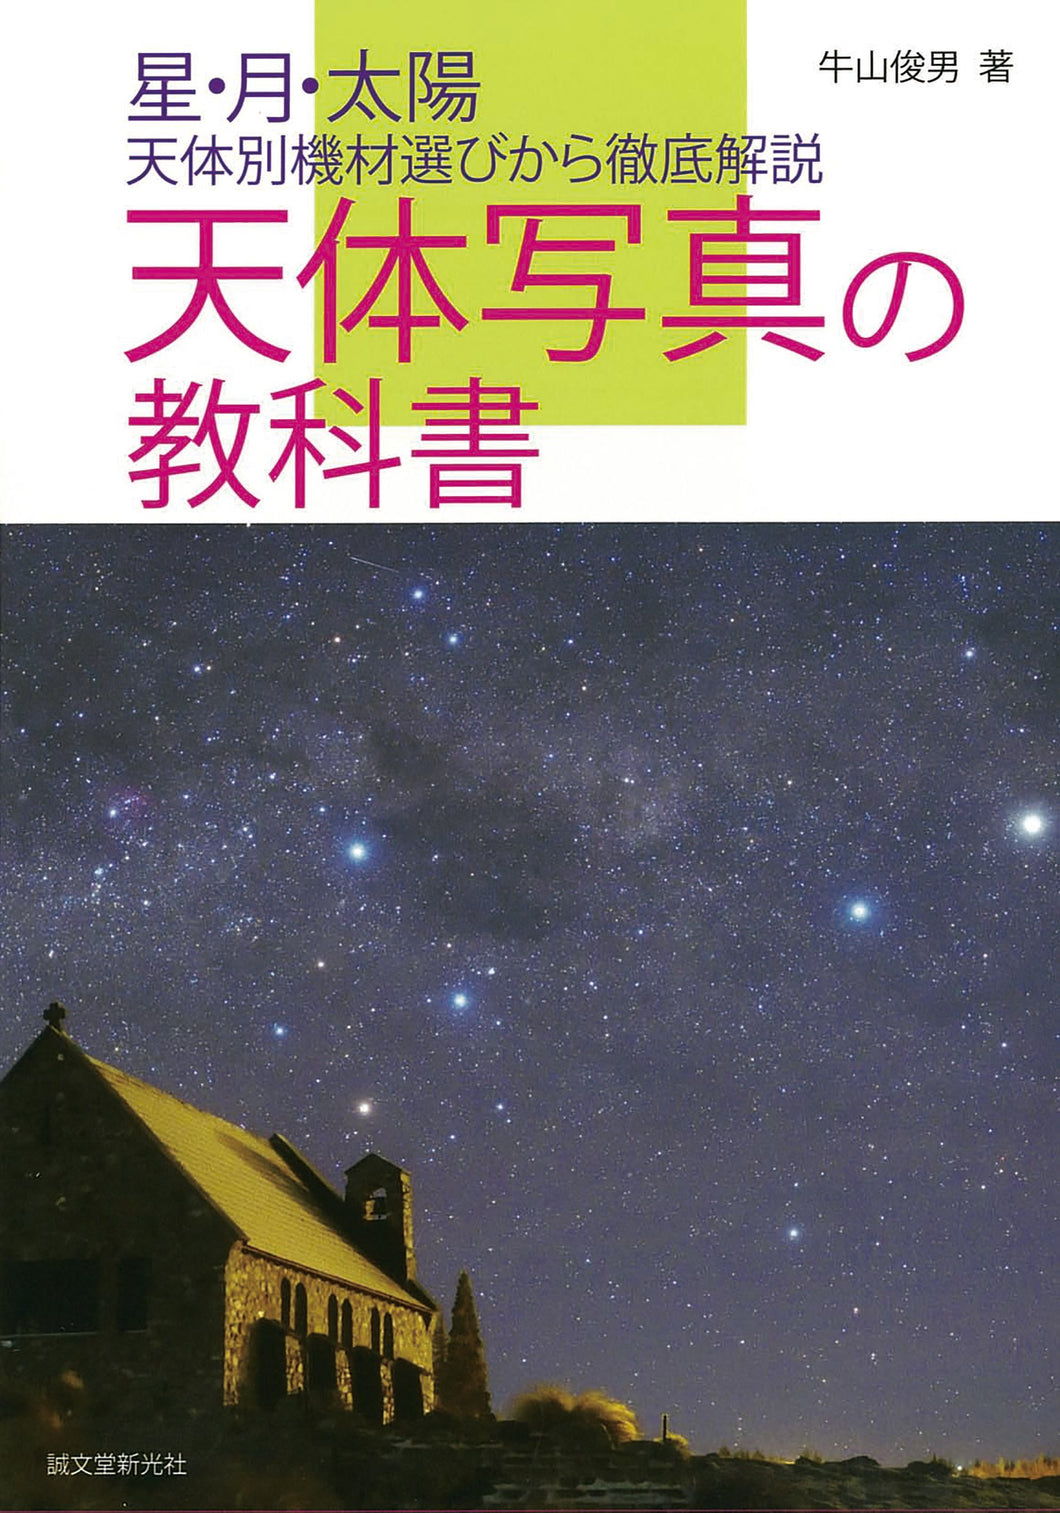 textbook of astrophotography